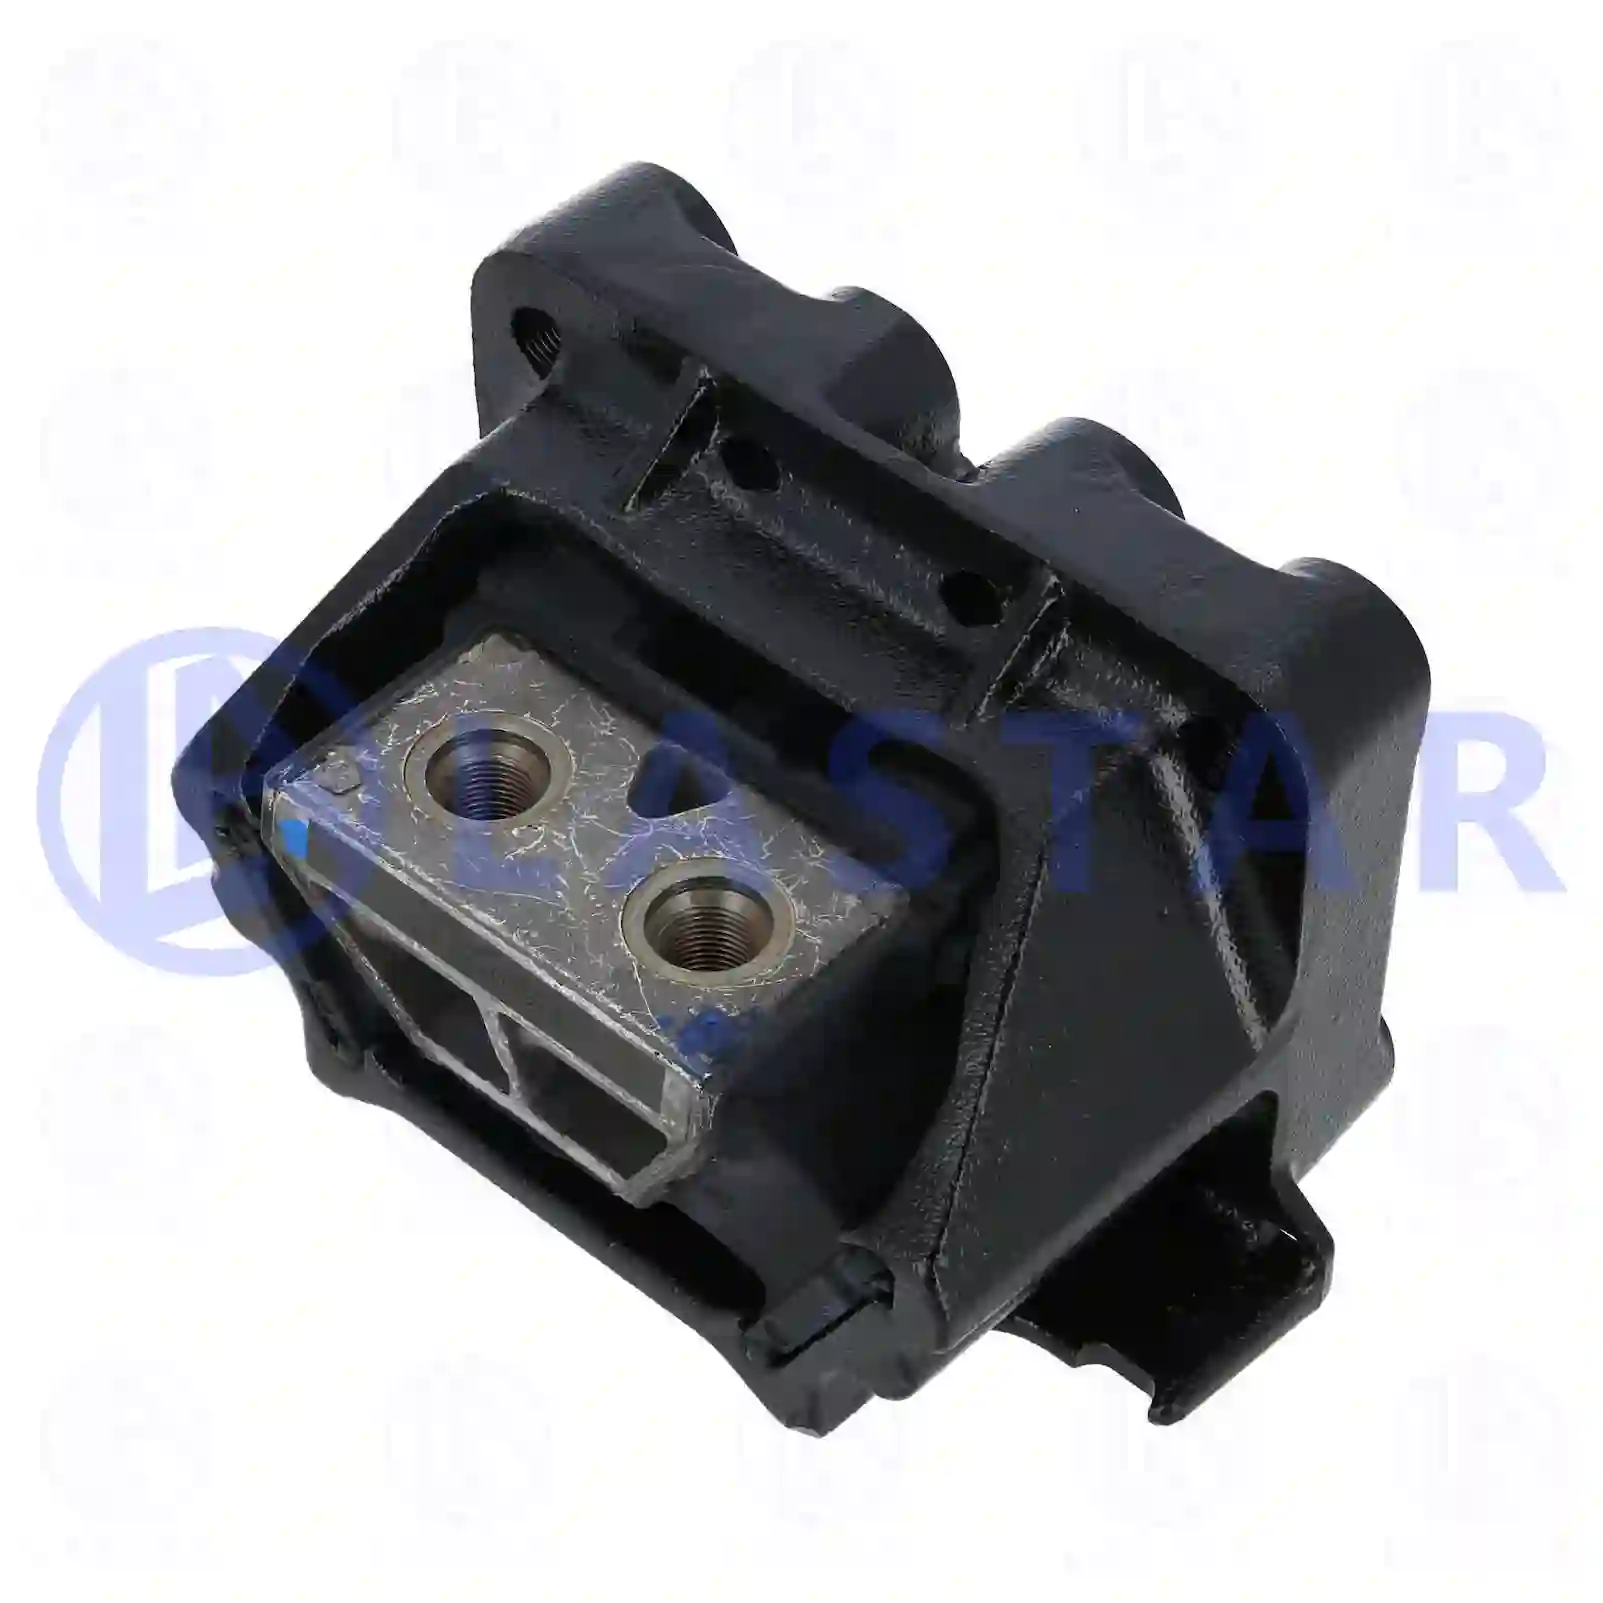 Engine mounting, 77702462, 9612417313 ||  77702462 Lastar Spare Part | Truck Spare Parts, Auotomotive Spare Parts Engine mounting, 77702462, 9612417313 ||  77702462 Lastar Spare Part | Truck Spare Parts, Auotomotive Spare Parts